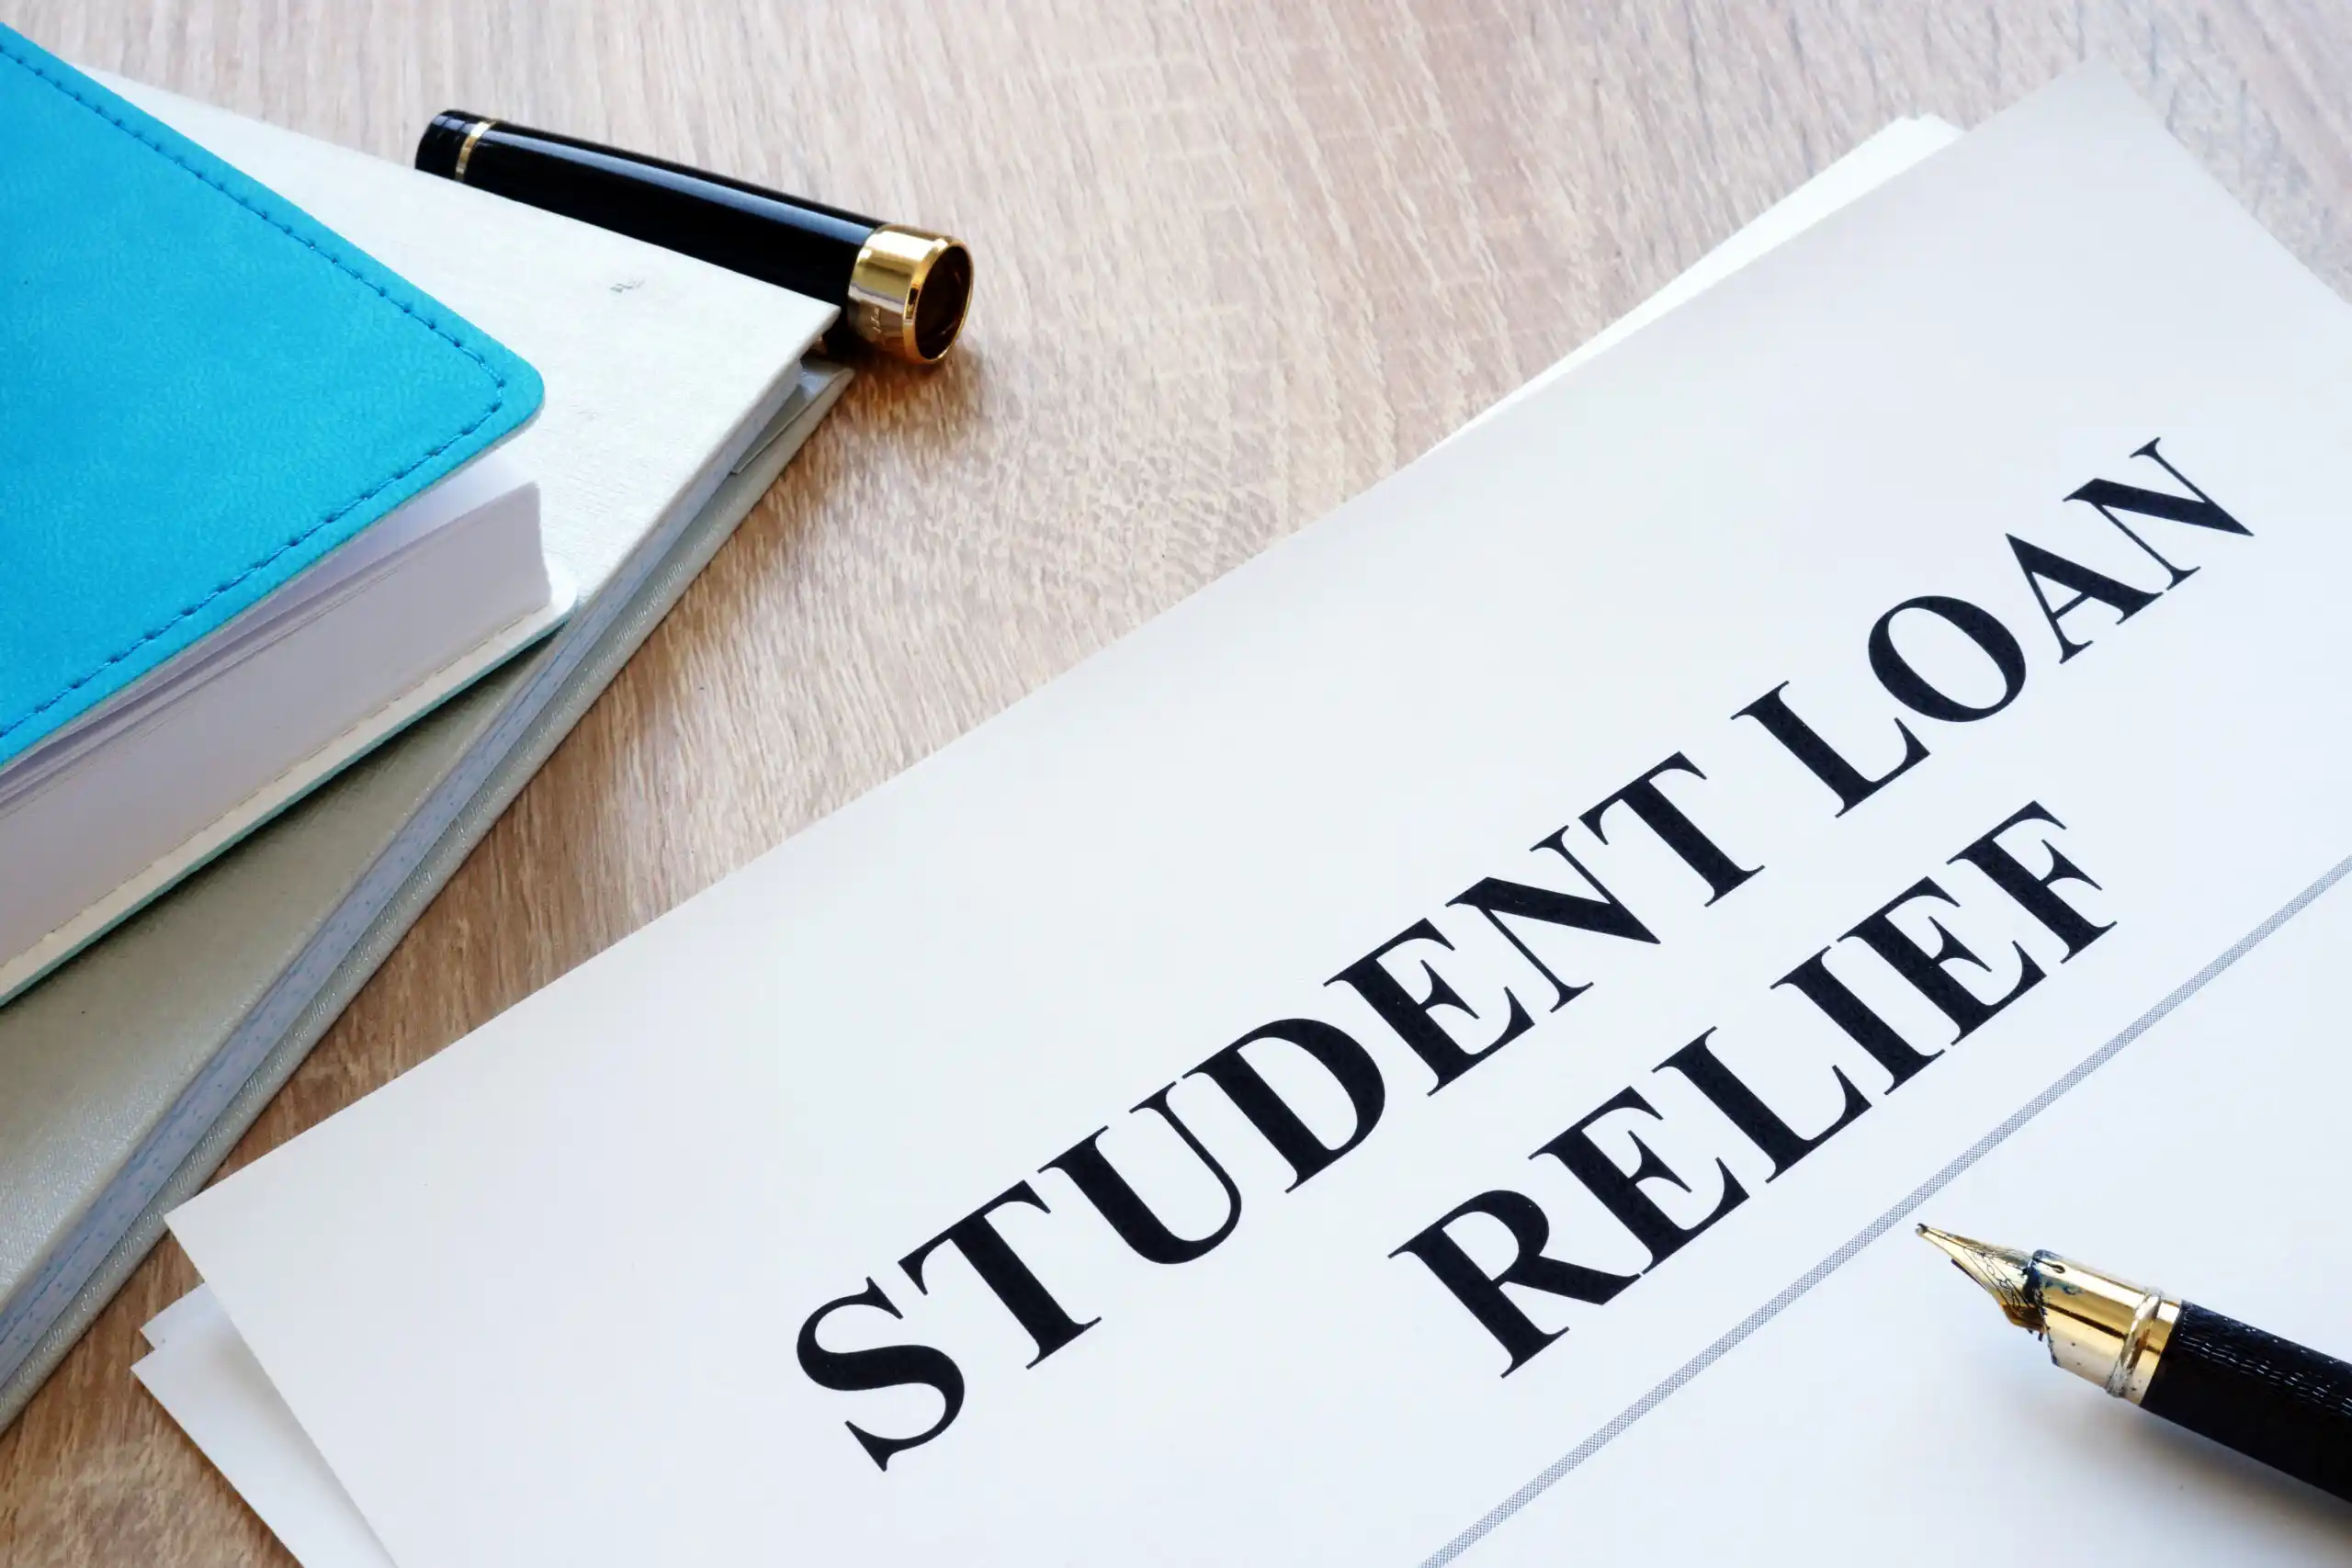 Student Loan Relief Application on Table